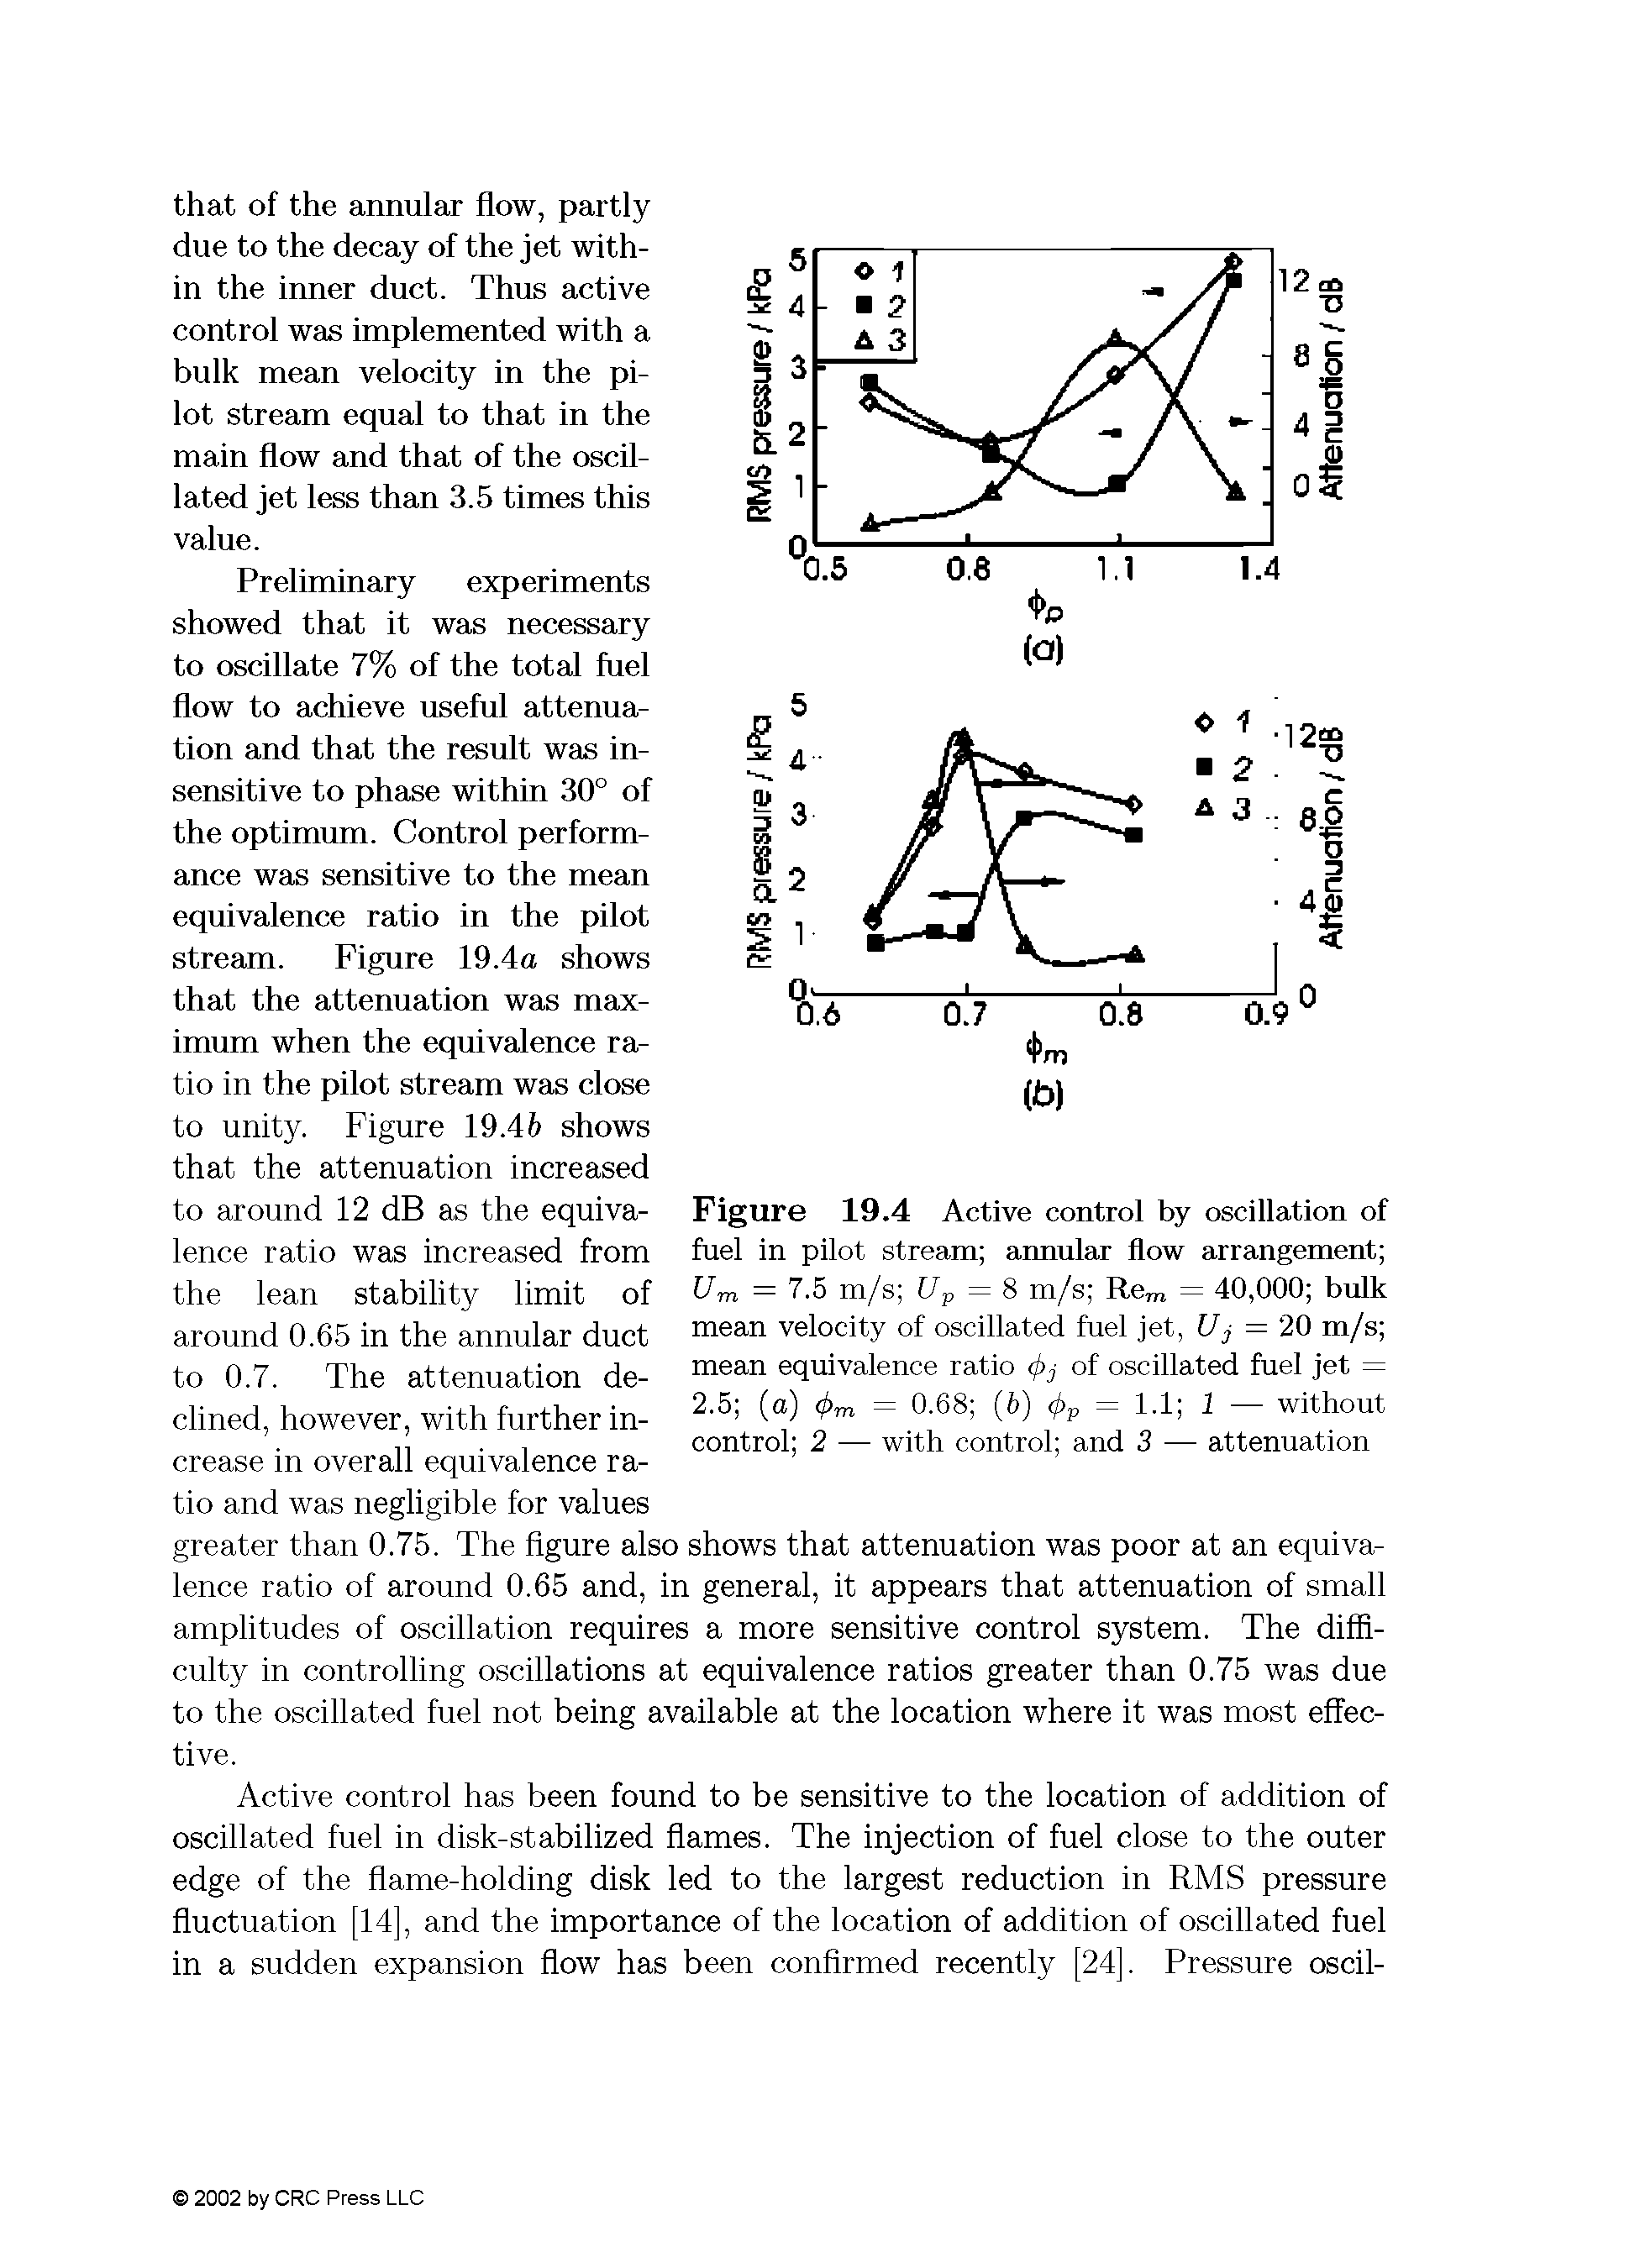 Figure 19.4 Active control by oscillation of fuel in pilot stream aimnlar flow arrangement Um = 7.5 m/s Up = 8 m/s Re j = 40,000 bnlk mean velocity of oscillated fuel jet, Uj = 20 m/s mean equivalence ratio 4>j of oscillated fuel jet = 2.5 (a) cj>m = 0.68 (6) bp = 1.1 1 — without control 2 — with control and 3 — attenuation...